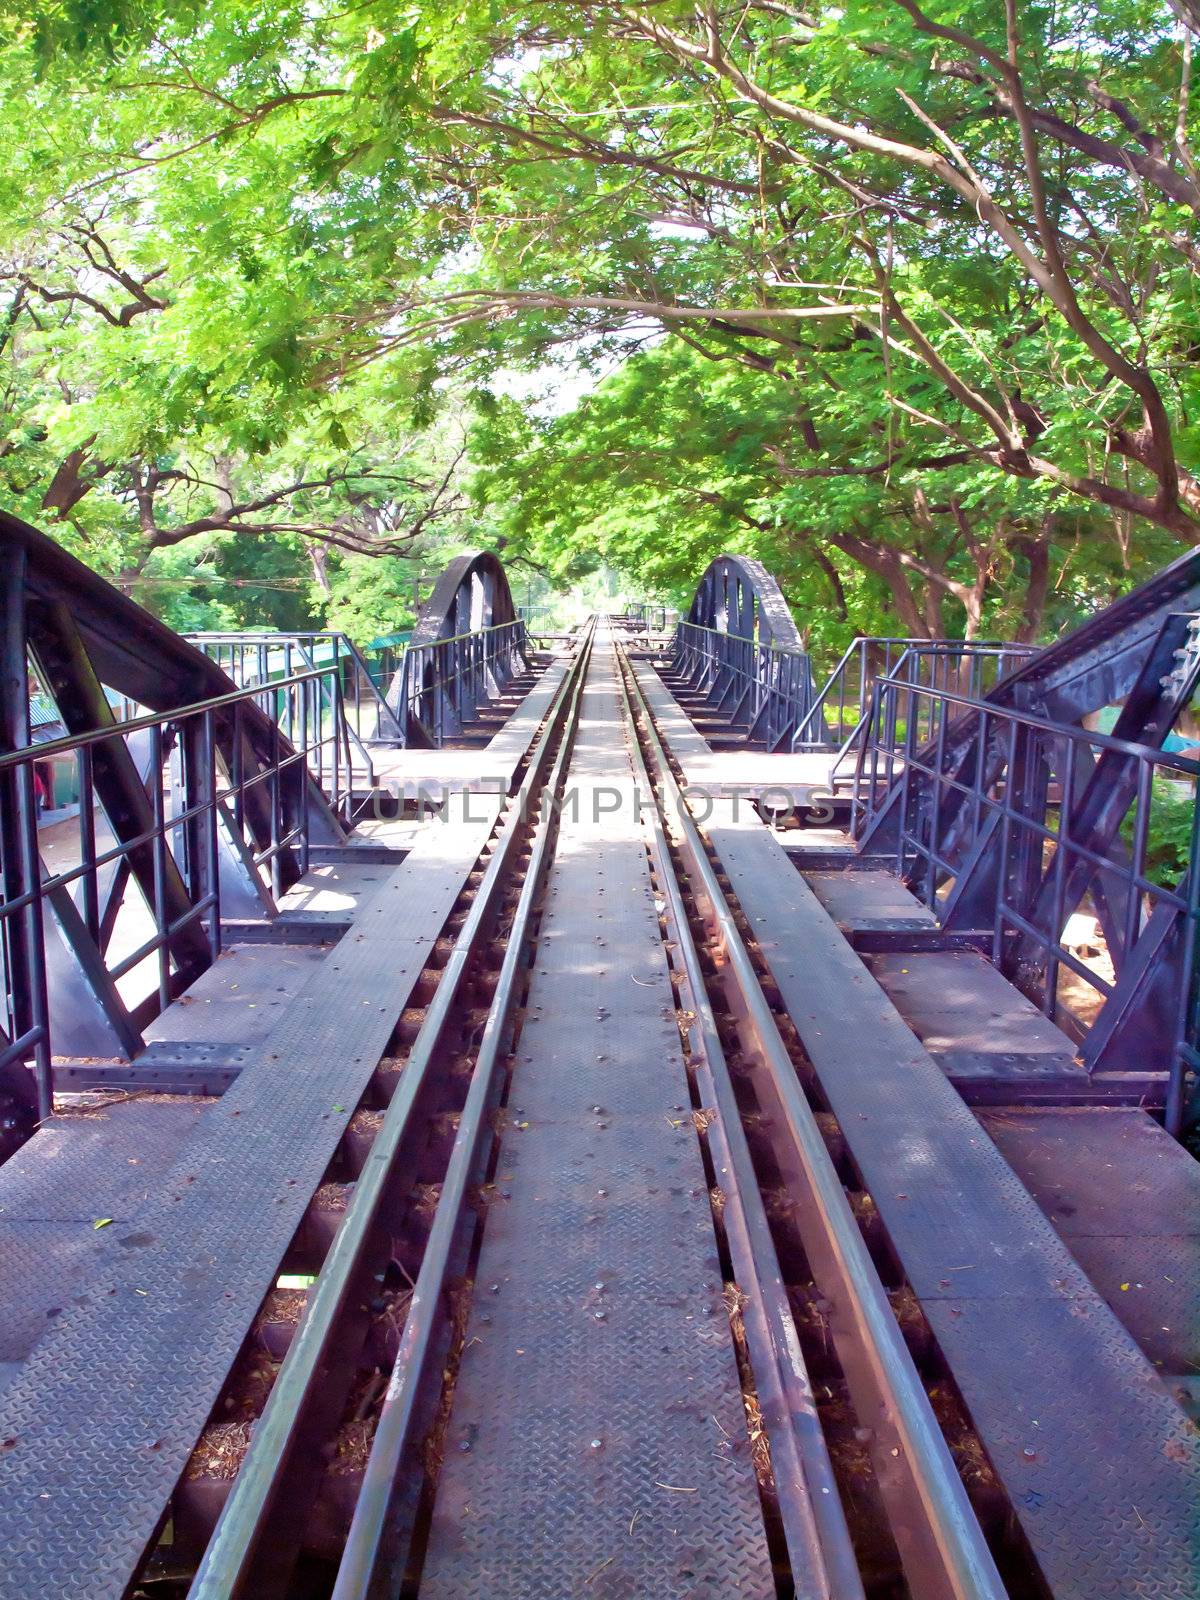 The bridge of the river kwai, The monument of WWII, Kanchanaburi, Thailand